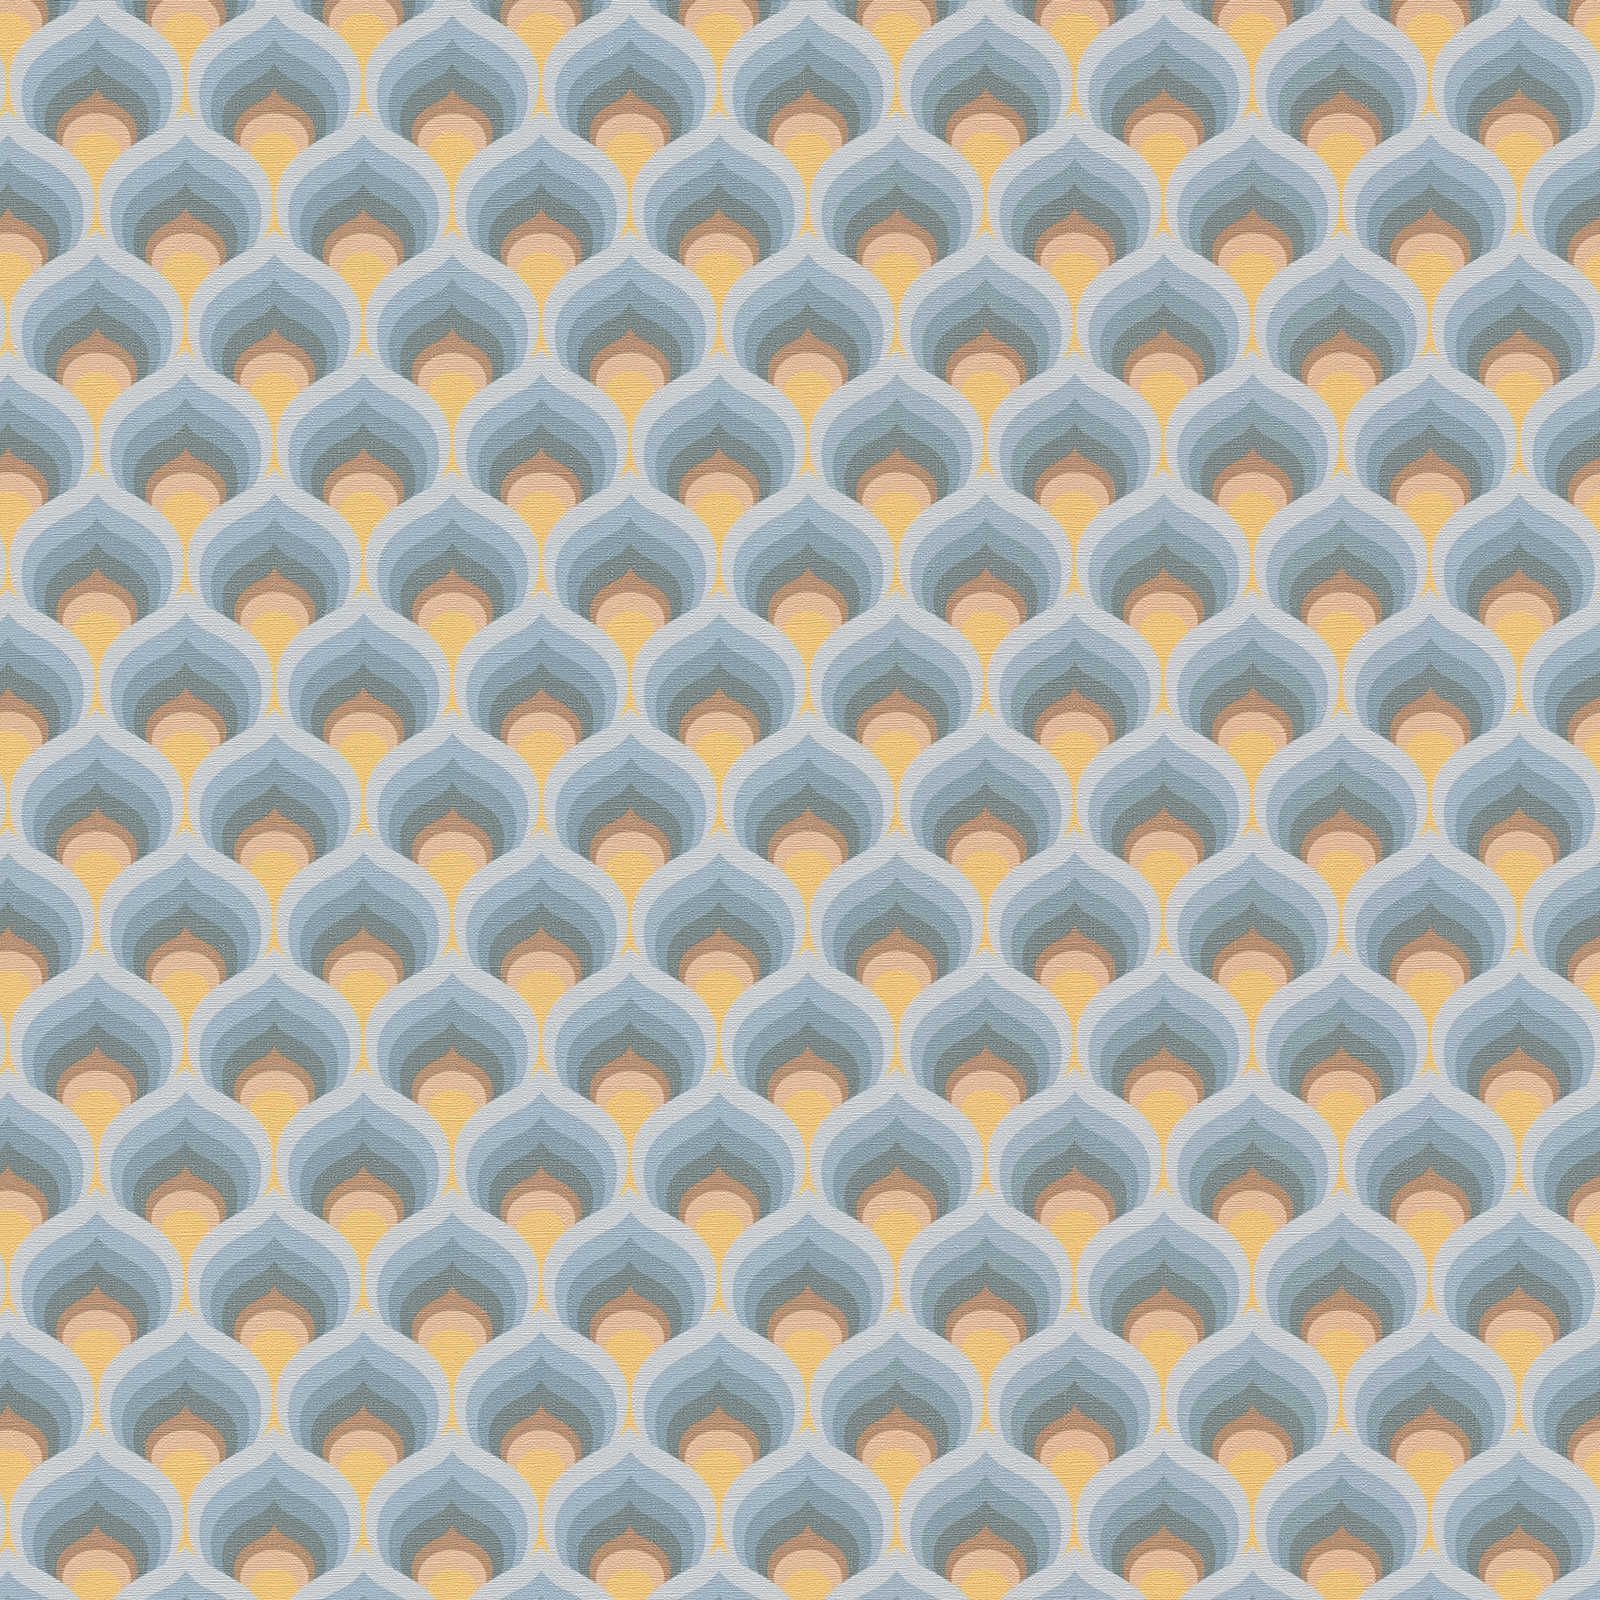 Non-woven wallpaper with retro scale pattern - blue, brown, yellow
